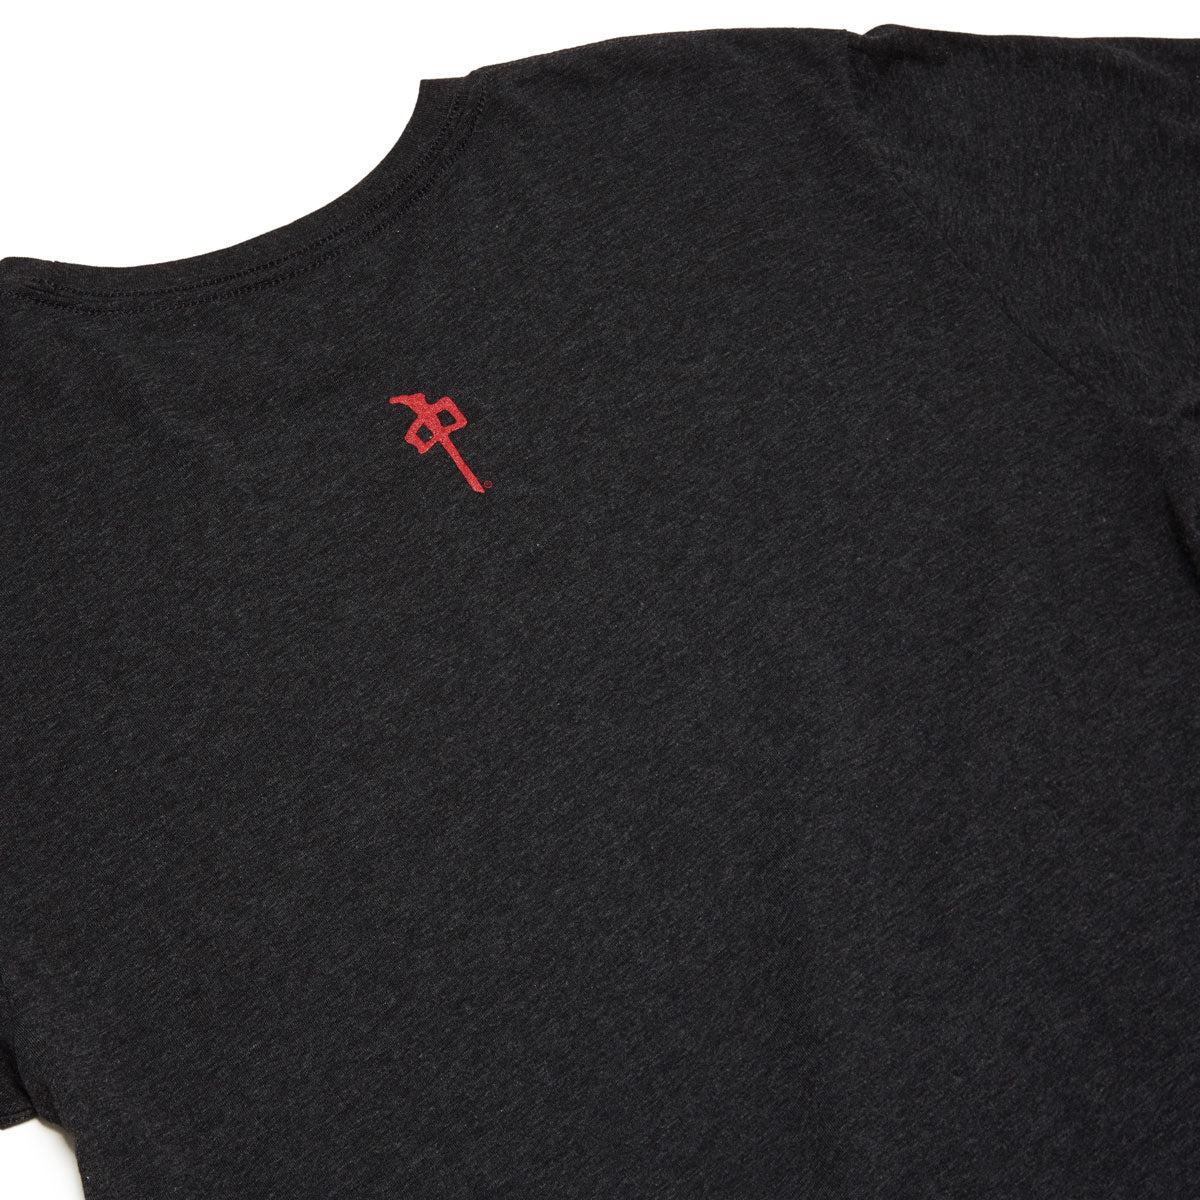 RDS Triblend Mini Og T-Shirt - Charcoal/Red/White image 3